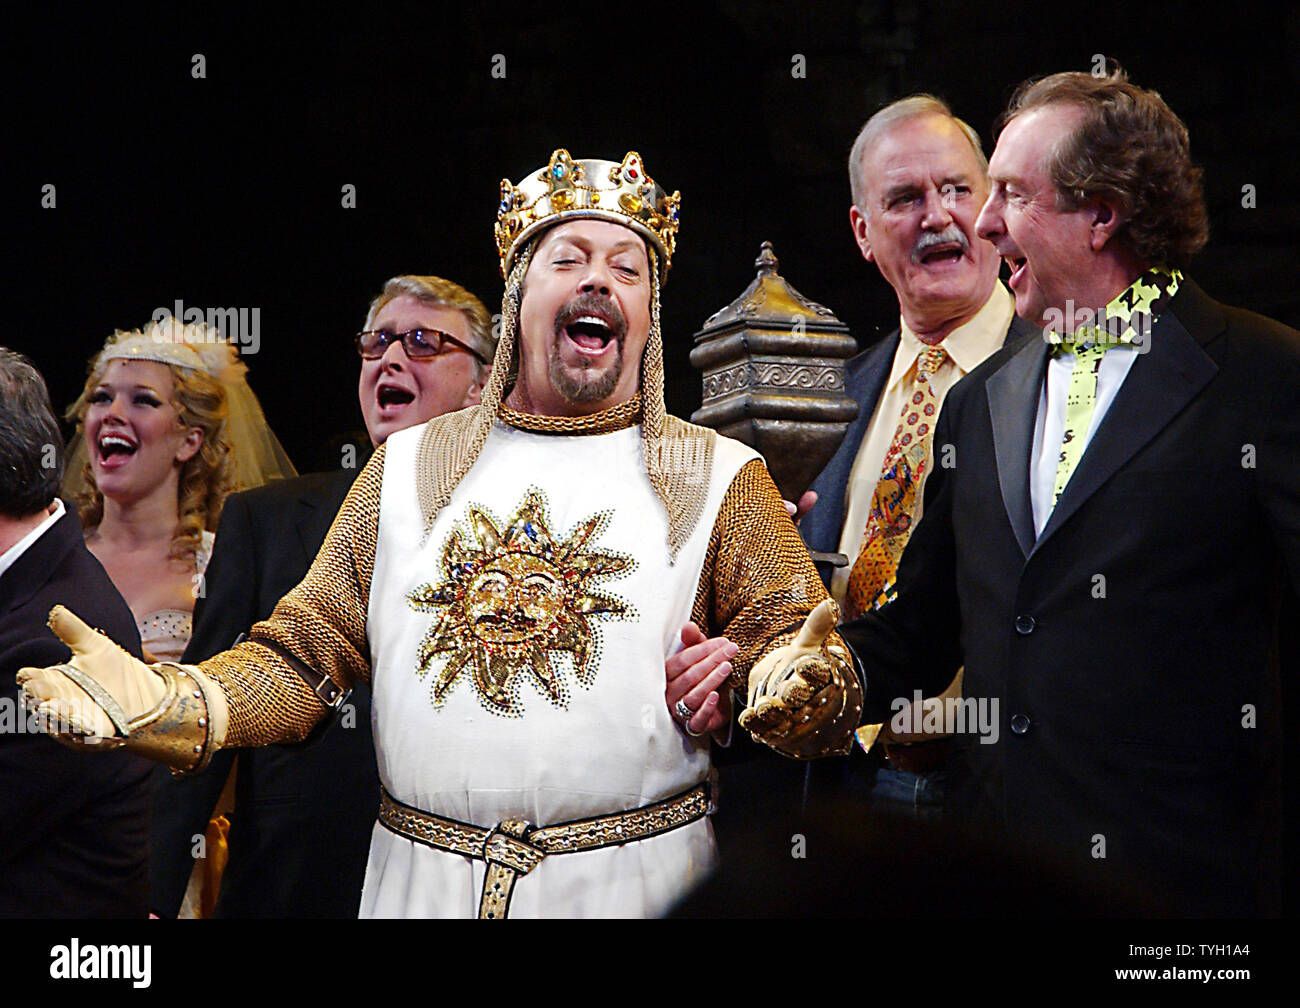 Director Mike Nichols, actor Tim Curry and Monty Python members John Cleese  and Eric Idle (shows composer/lyrcist) (left to right) take part in the  opening night curtain call bows on March 17,